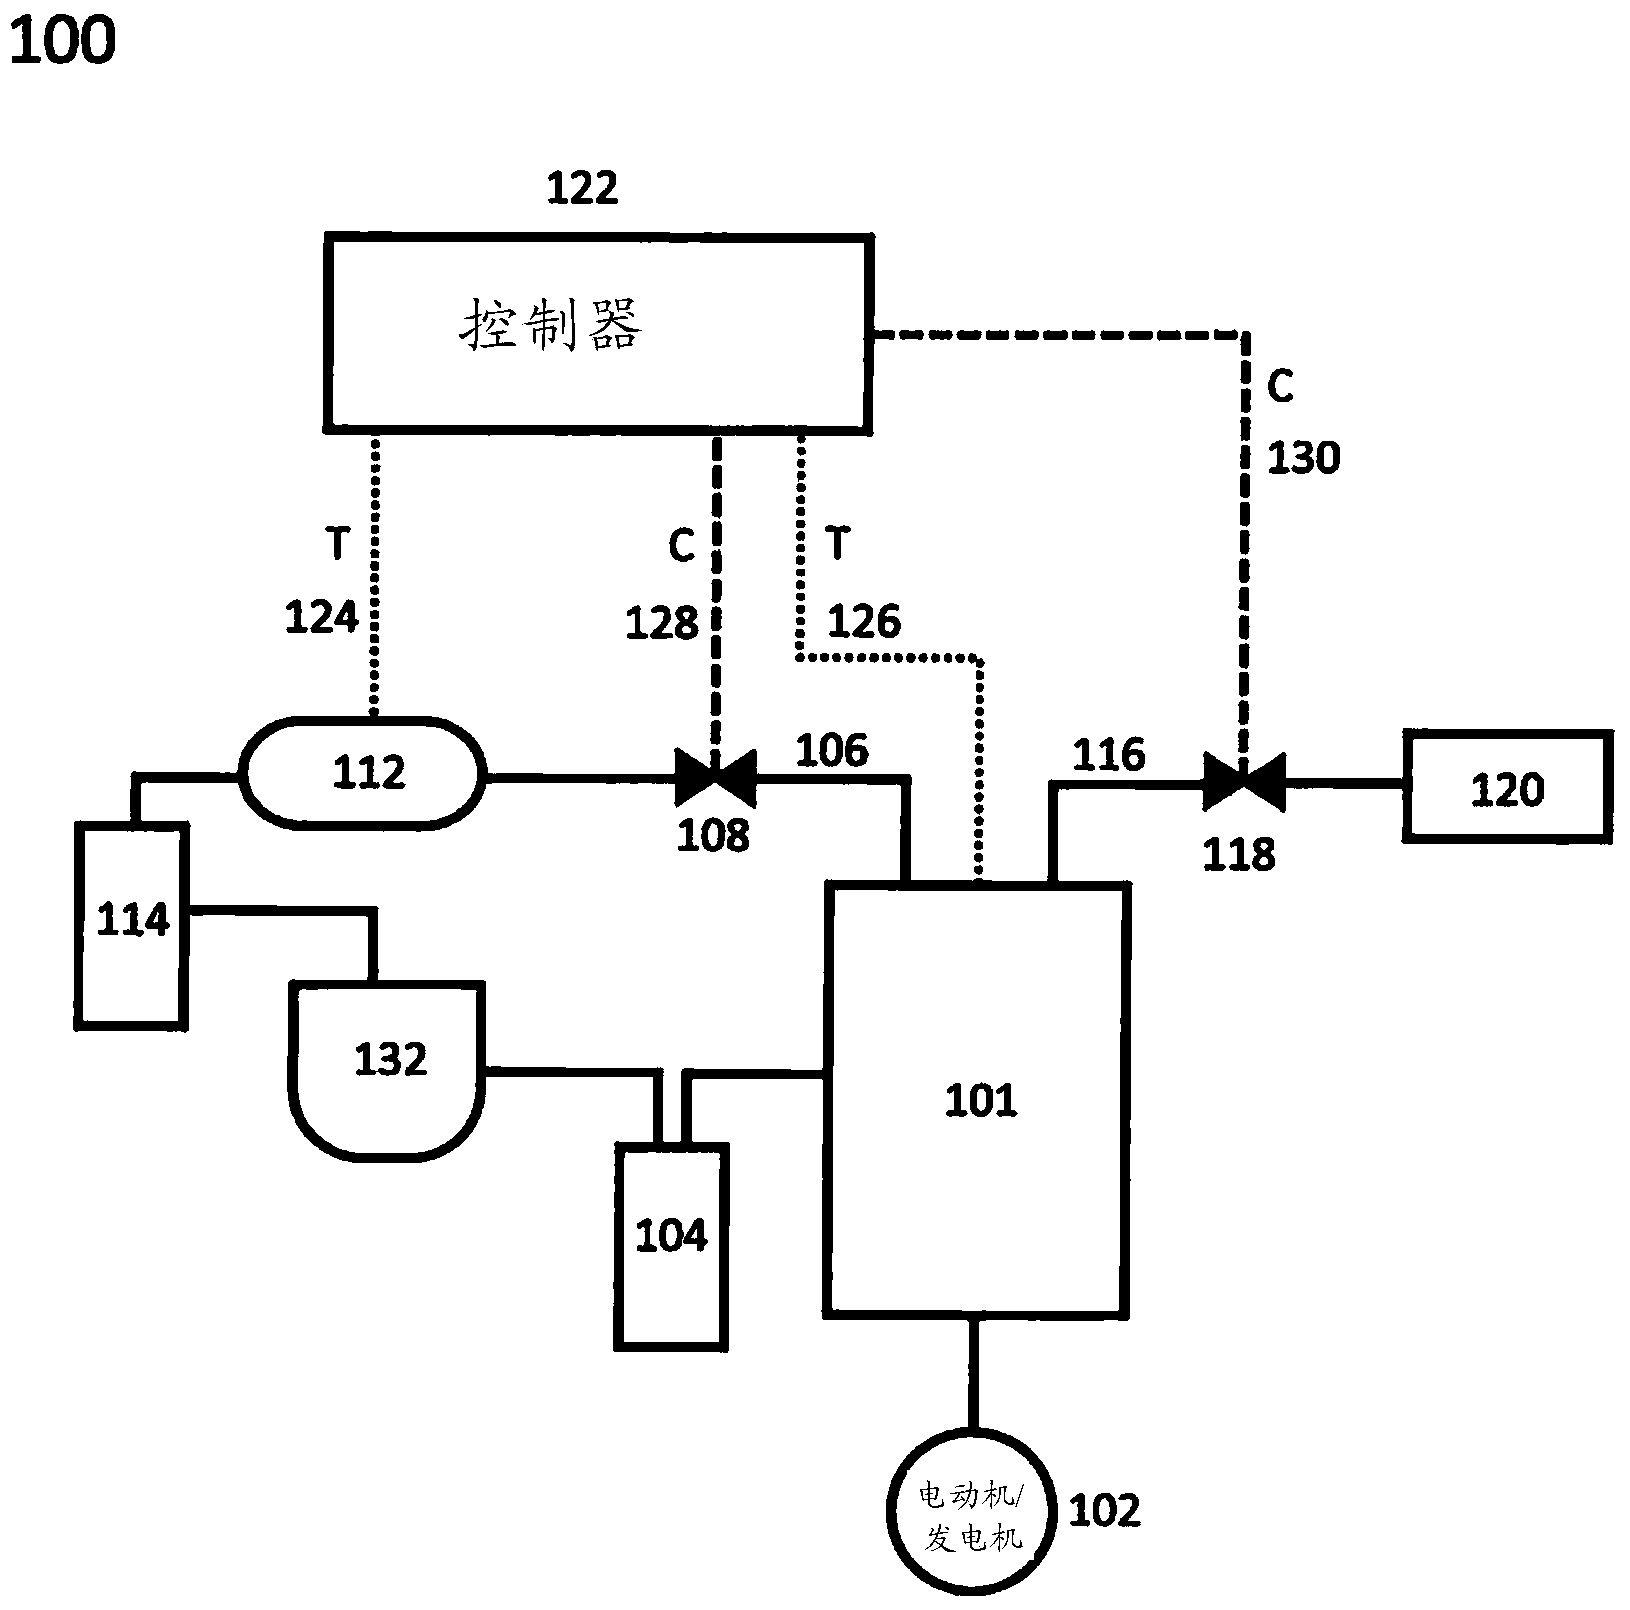 Systems and methods for efficient two-phase heat transfer in compressed-air energy storage systems